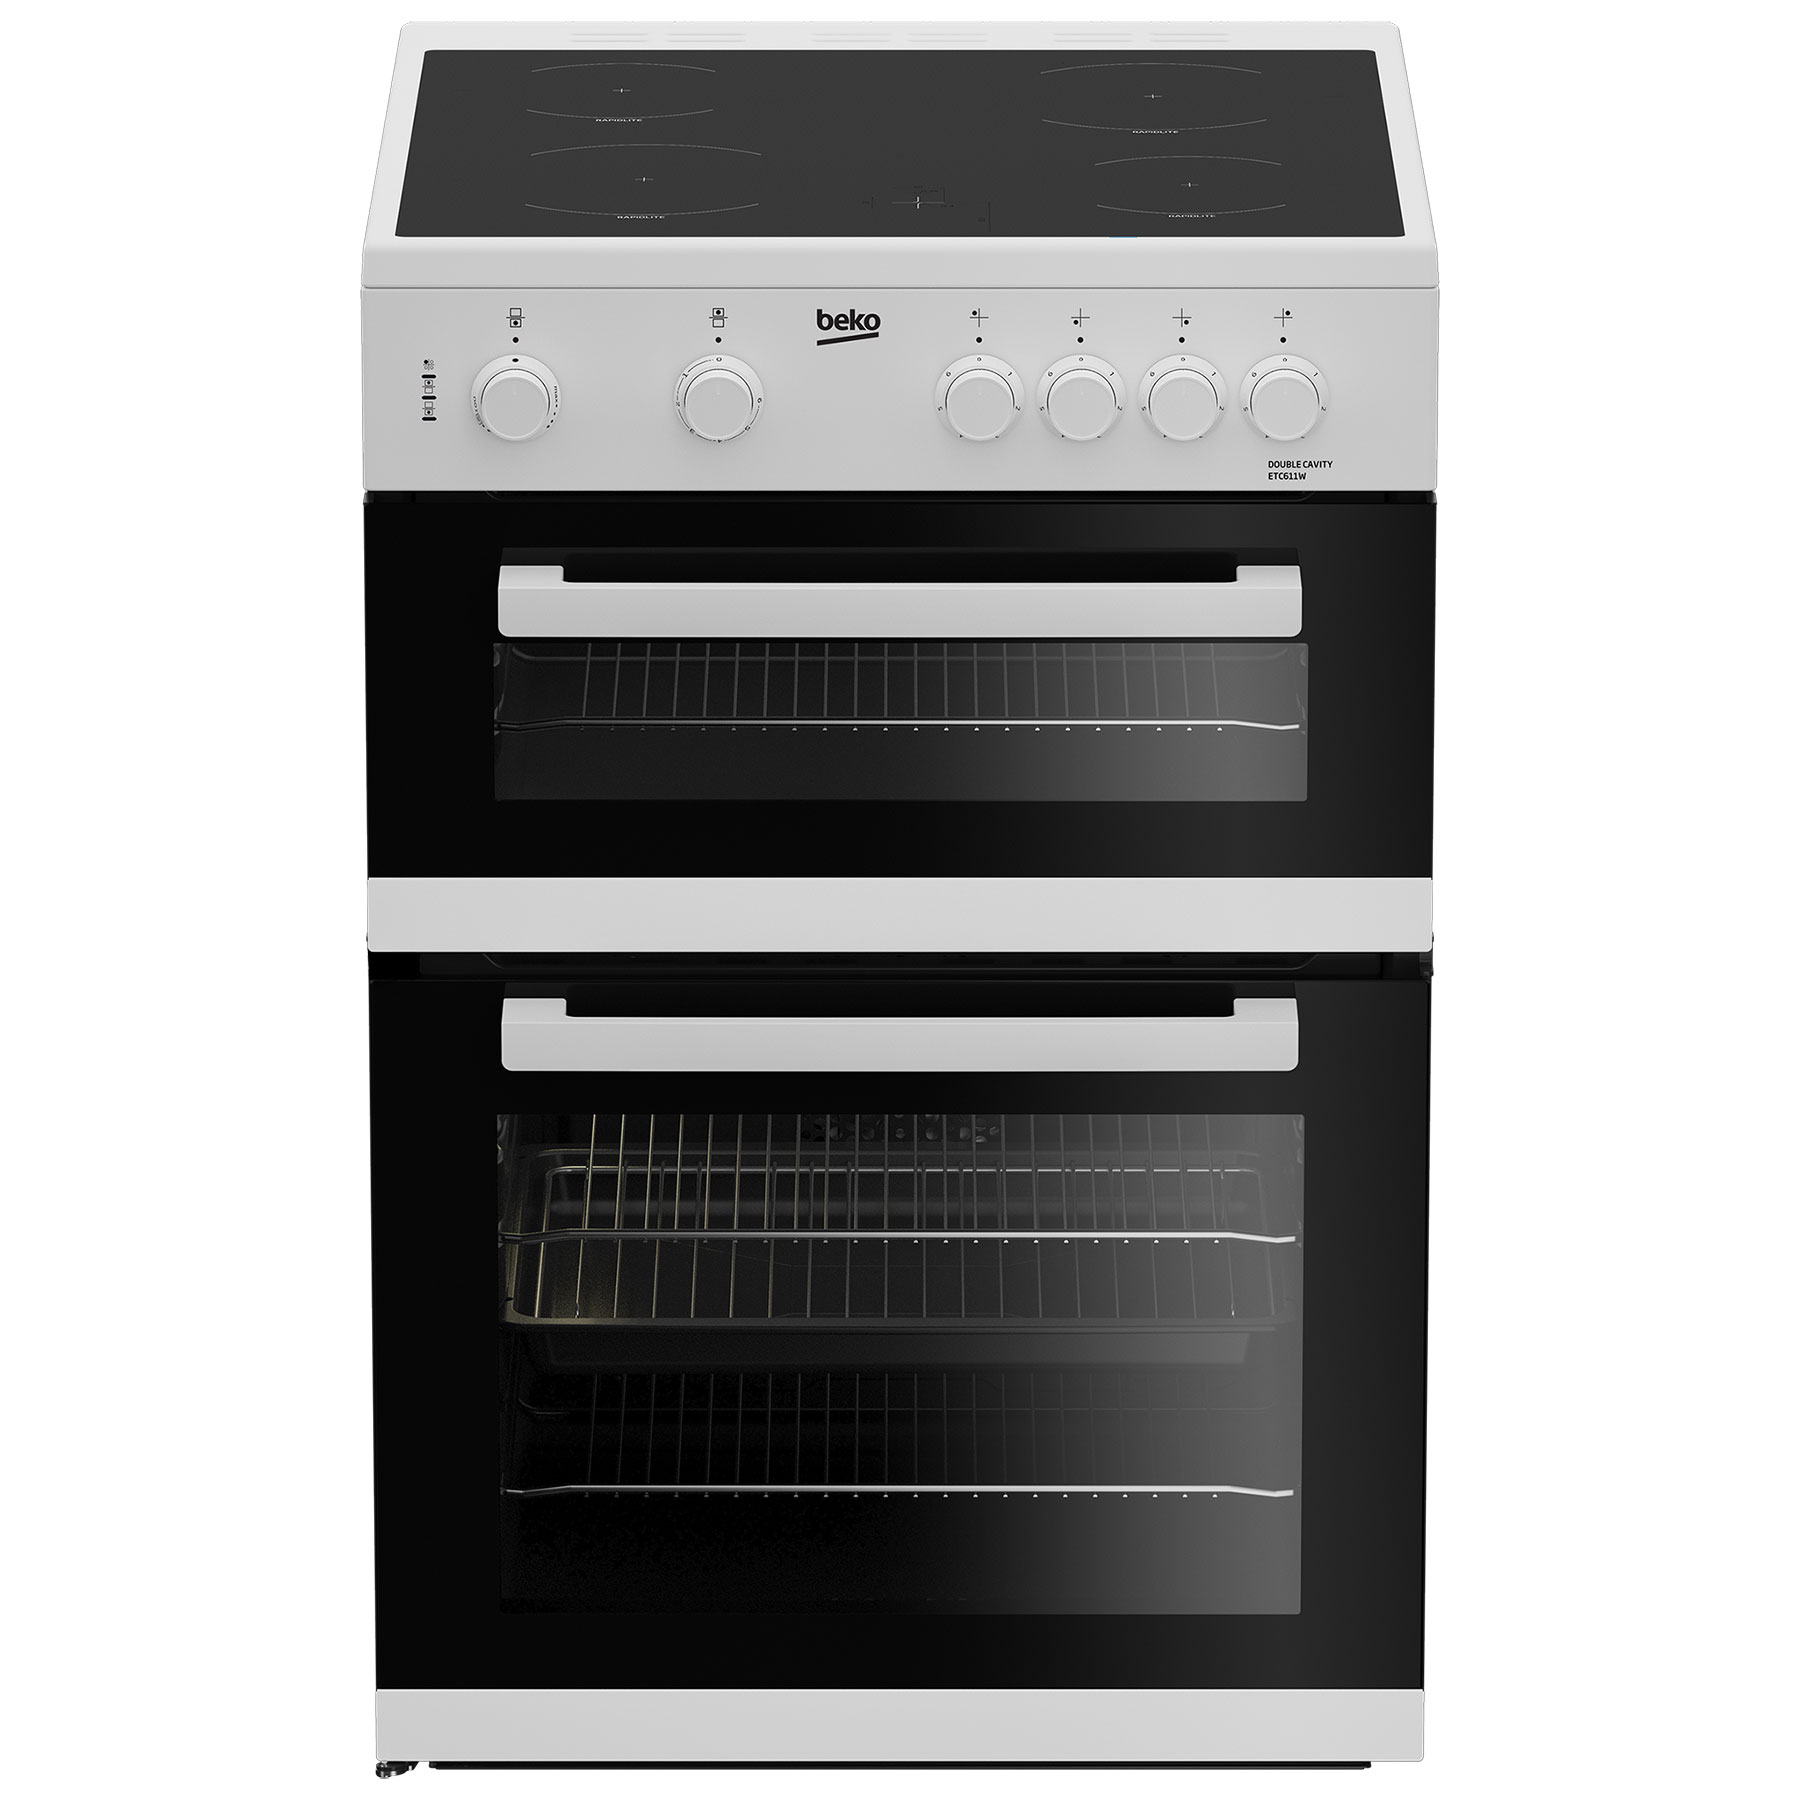 Image of Beko ETC611W 60cm Double Oven Electric Cooker in White Ceramic Hob